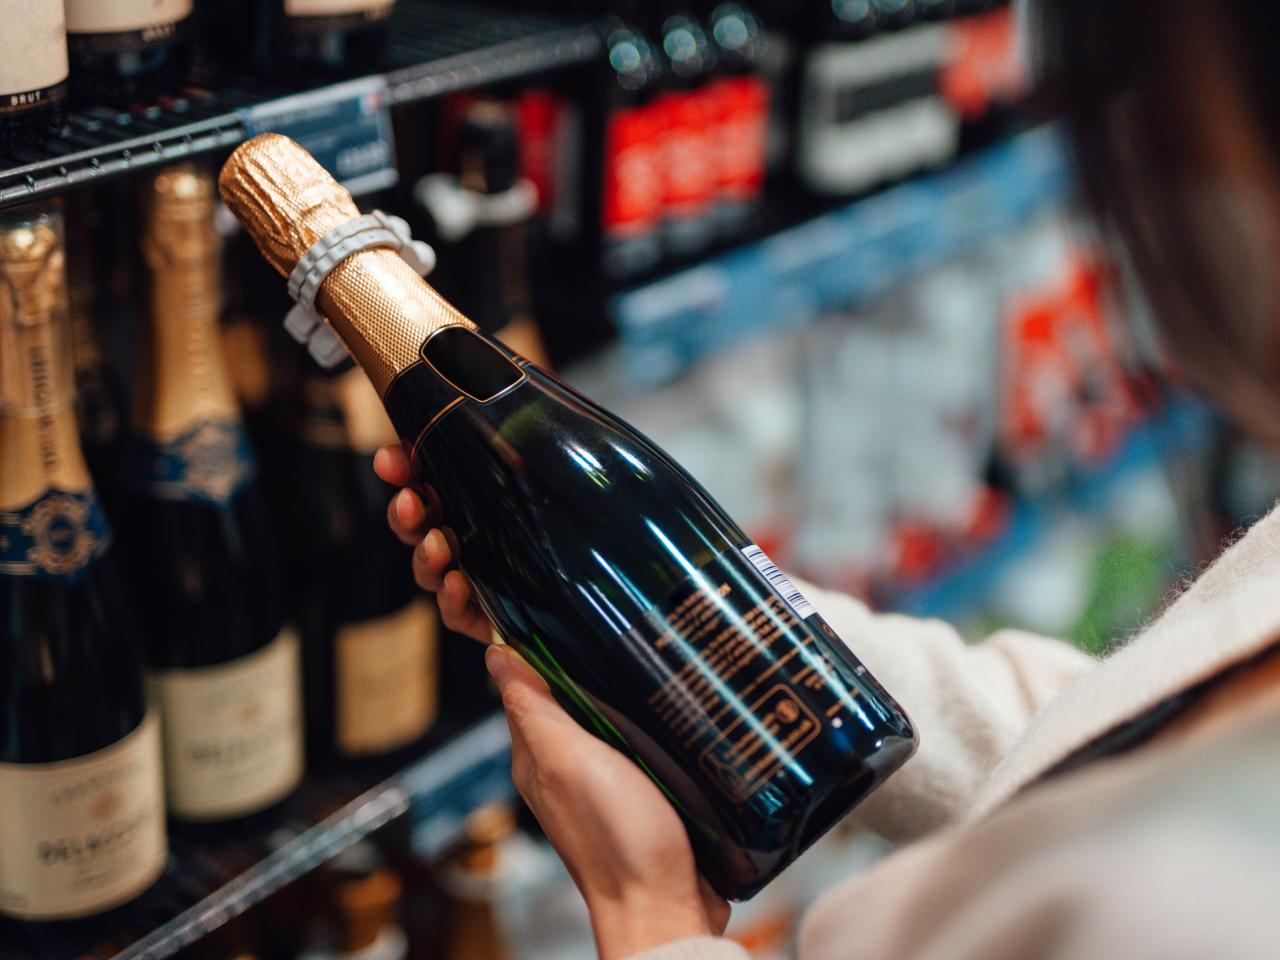 Sparkling wines perfect for holiday gifting and sipping